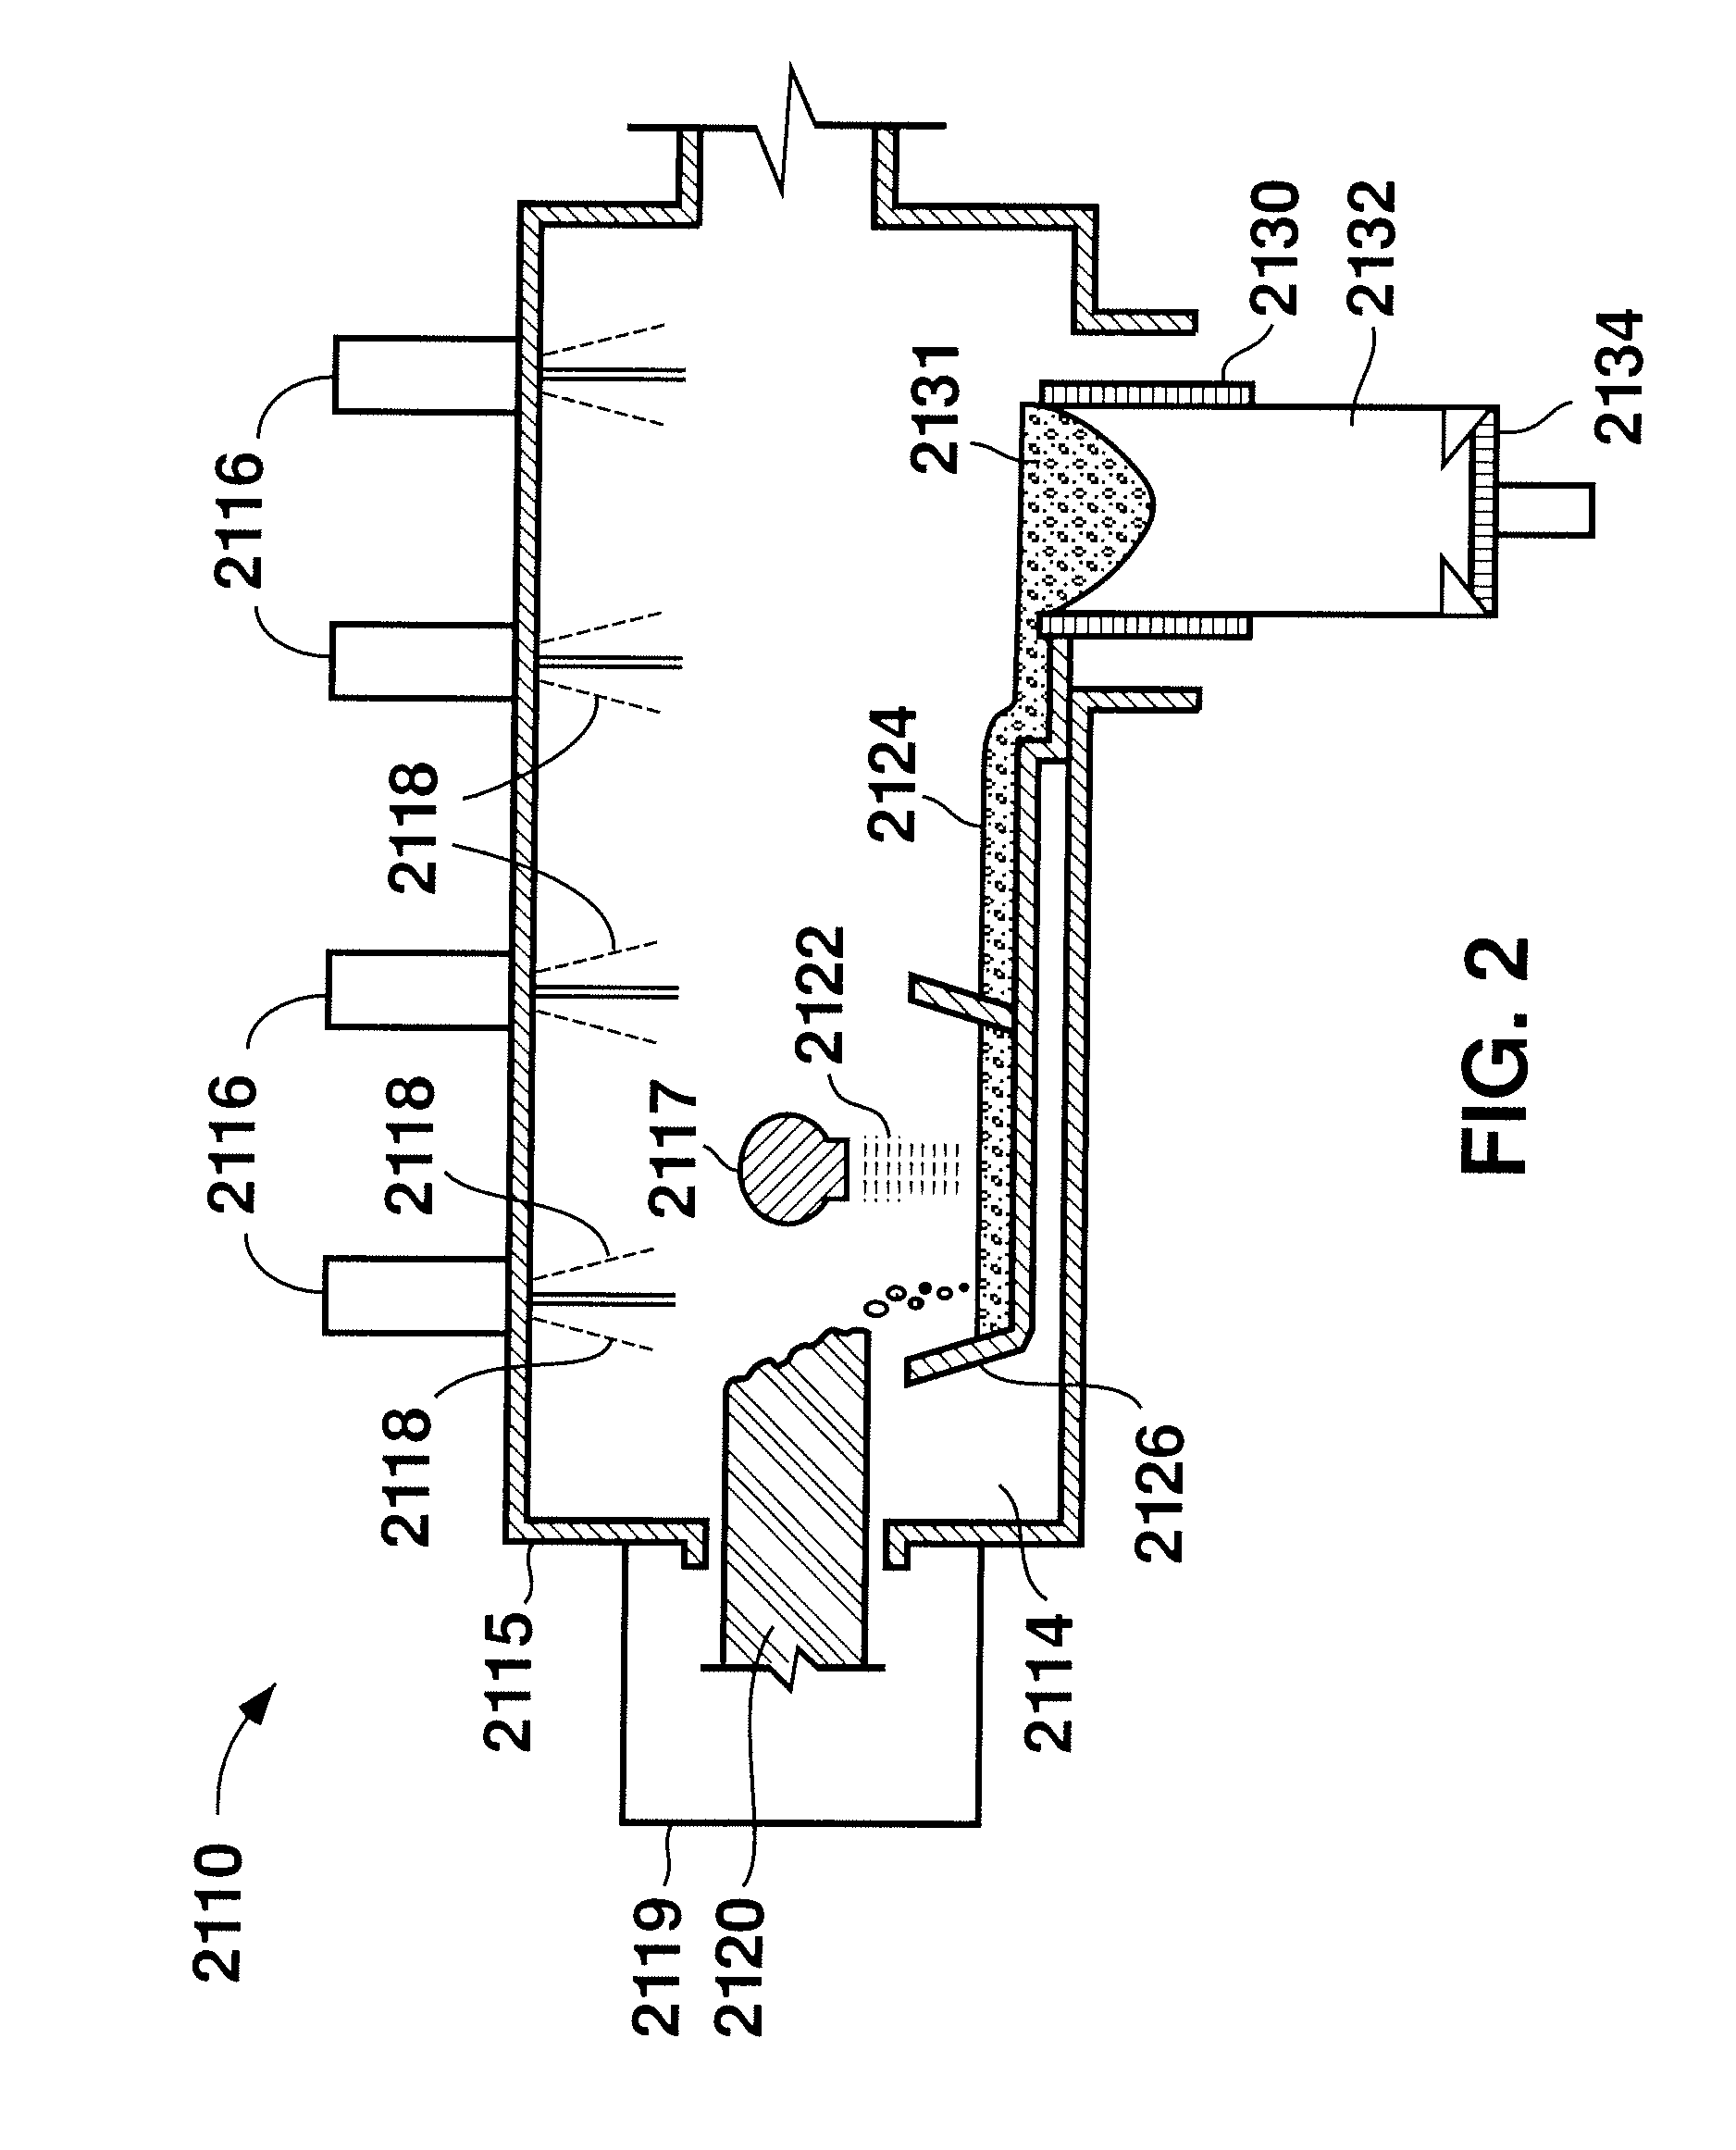 Method and apparatus for producing large diameter superalloy ingots